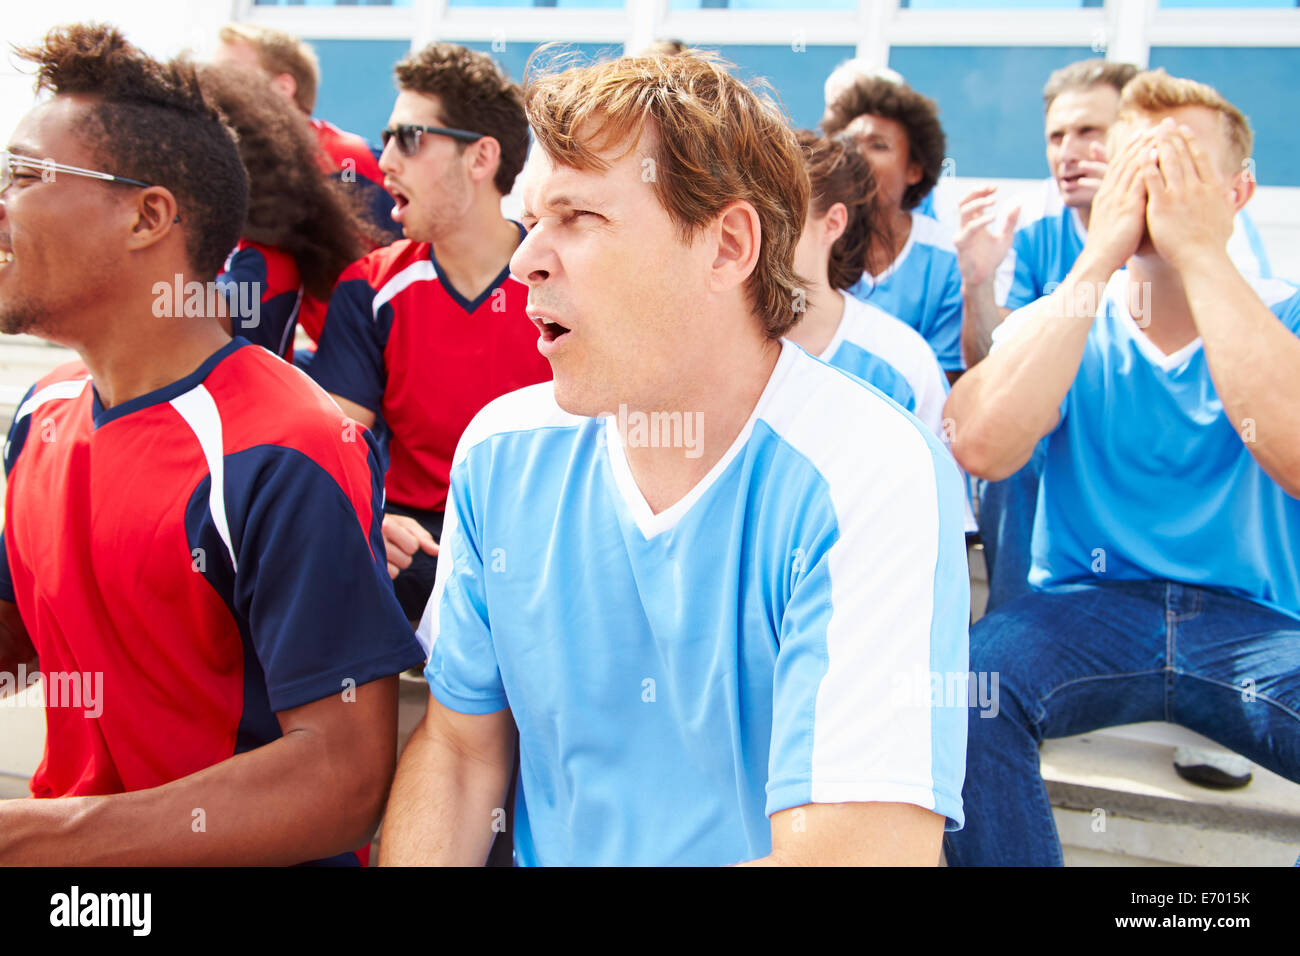 Rival Spectators Watching Sports Event Stock Photo